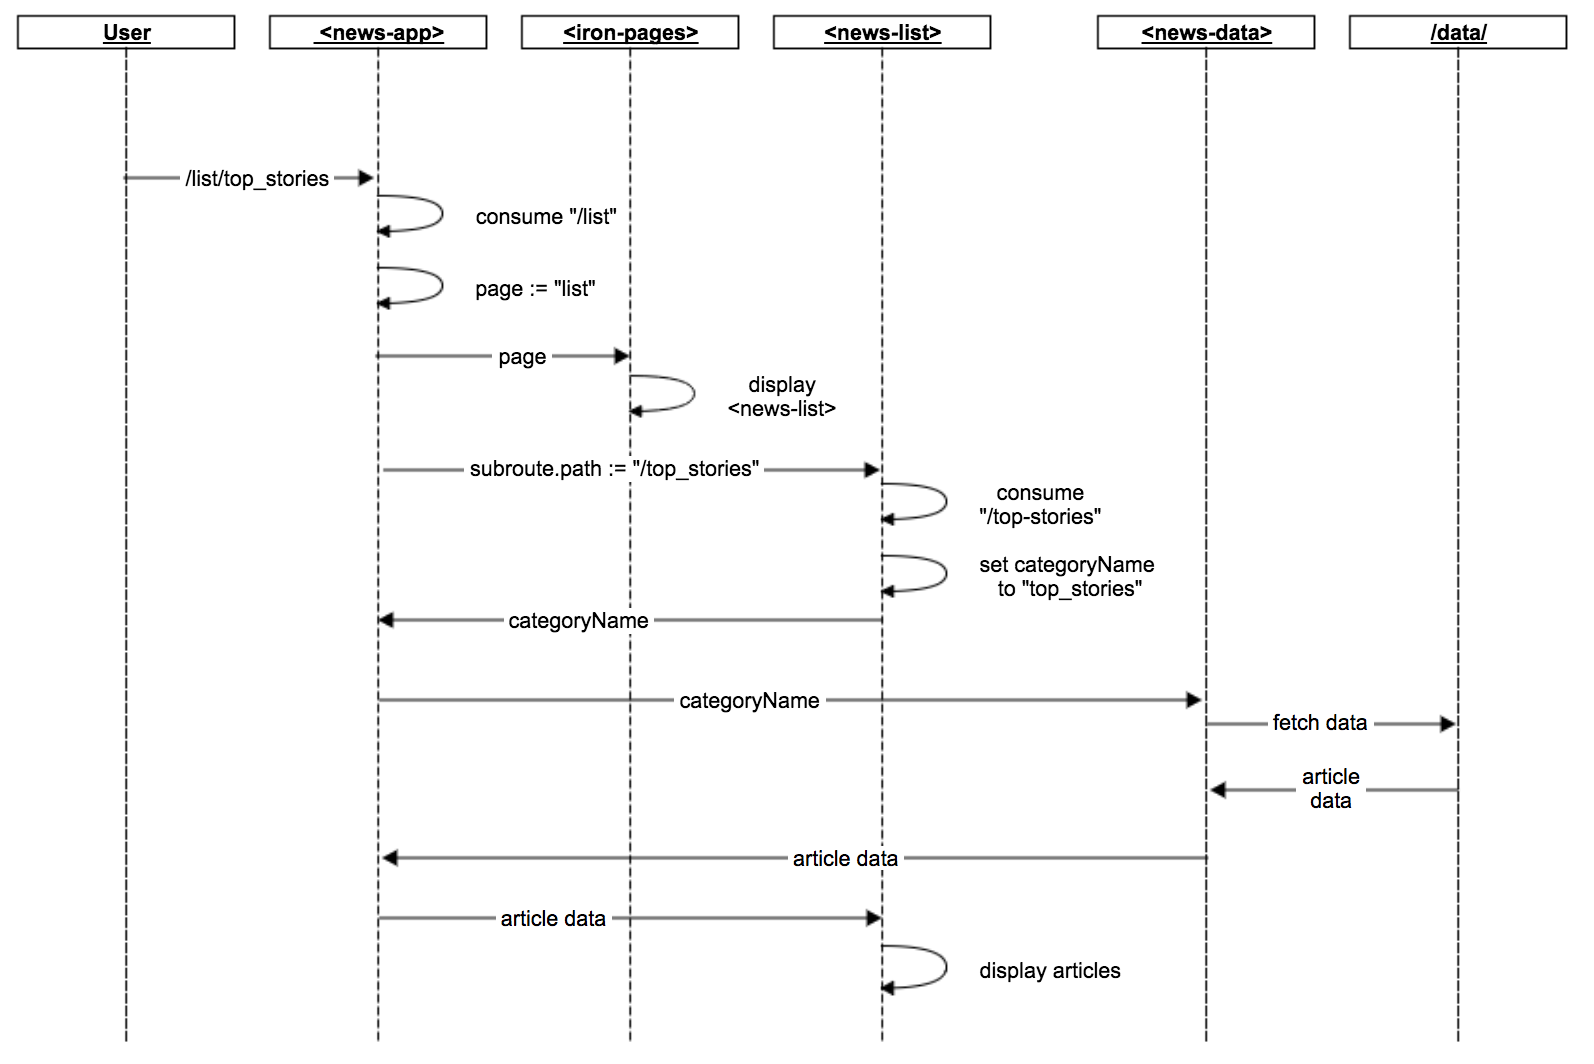 sequence diagram of data flow